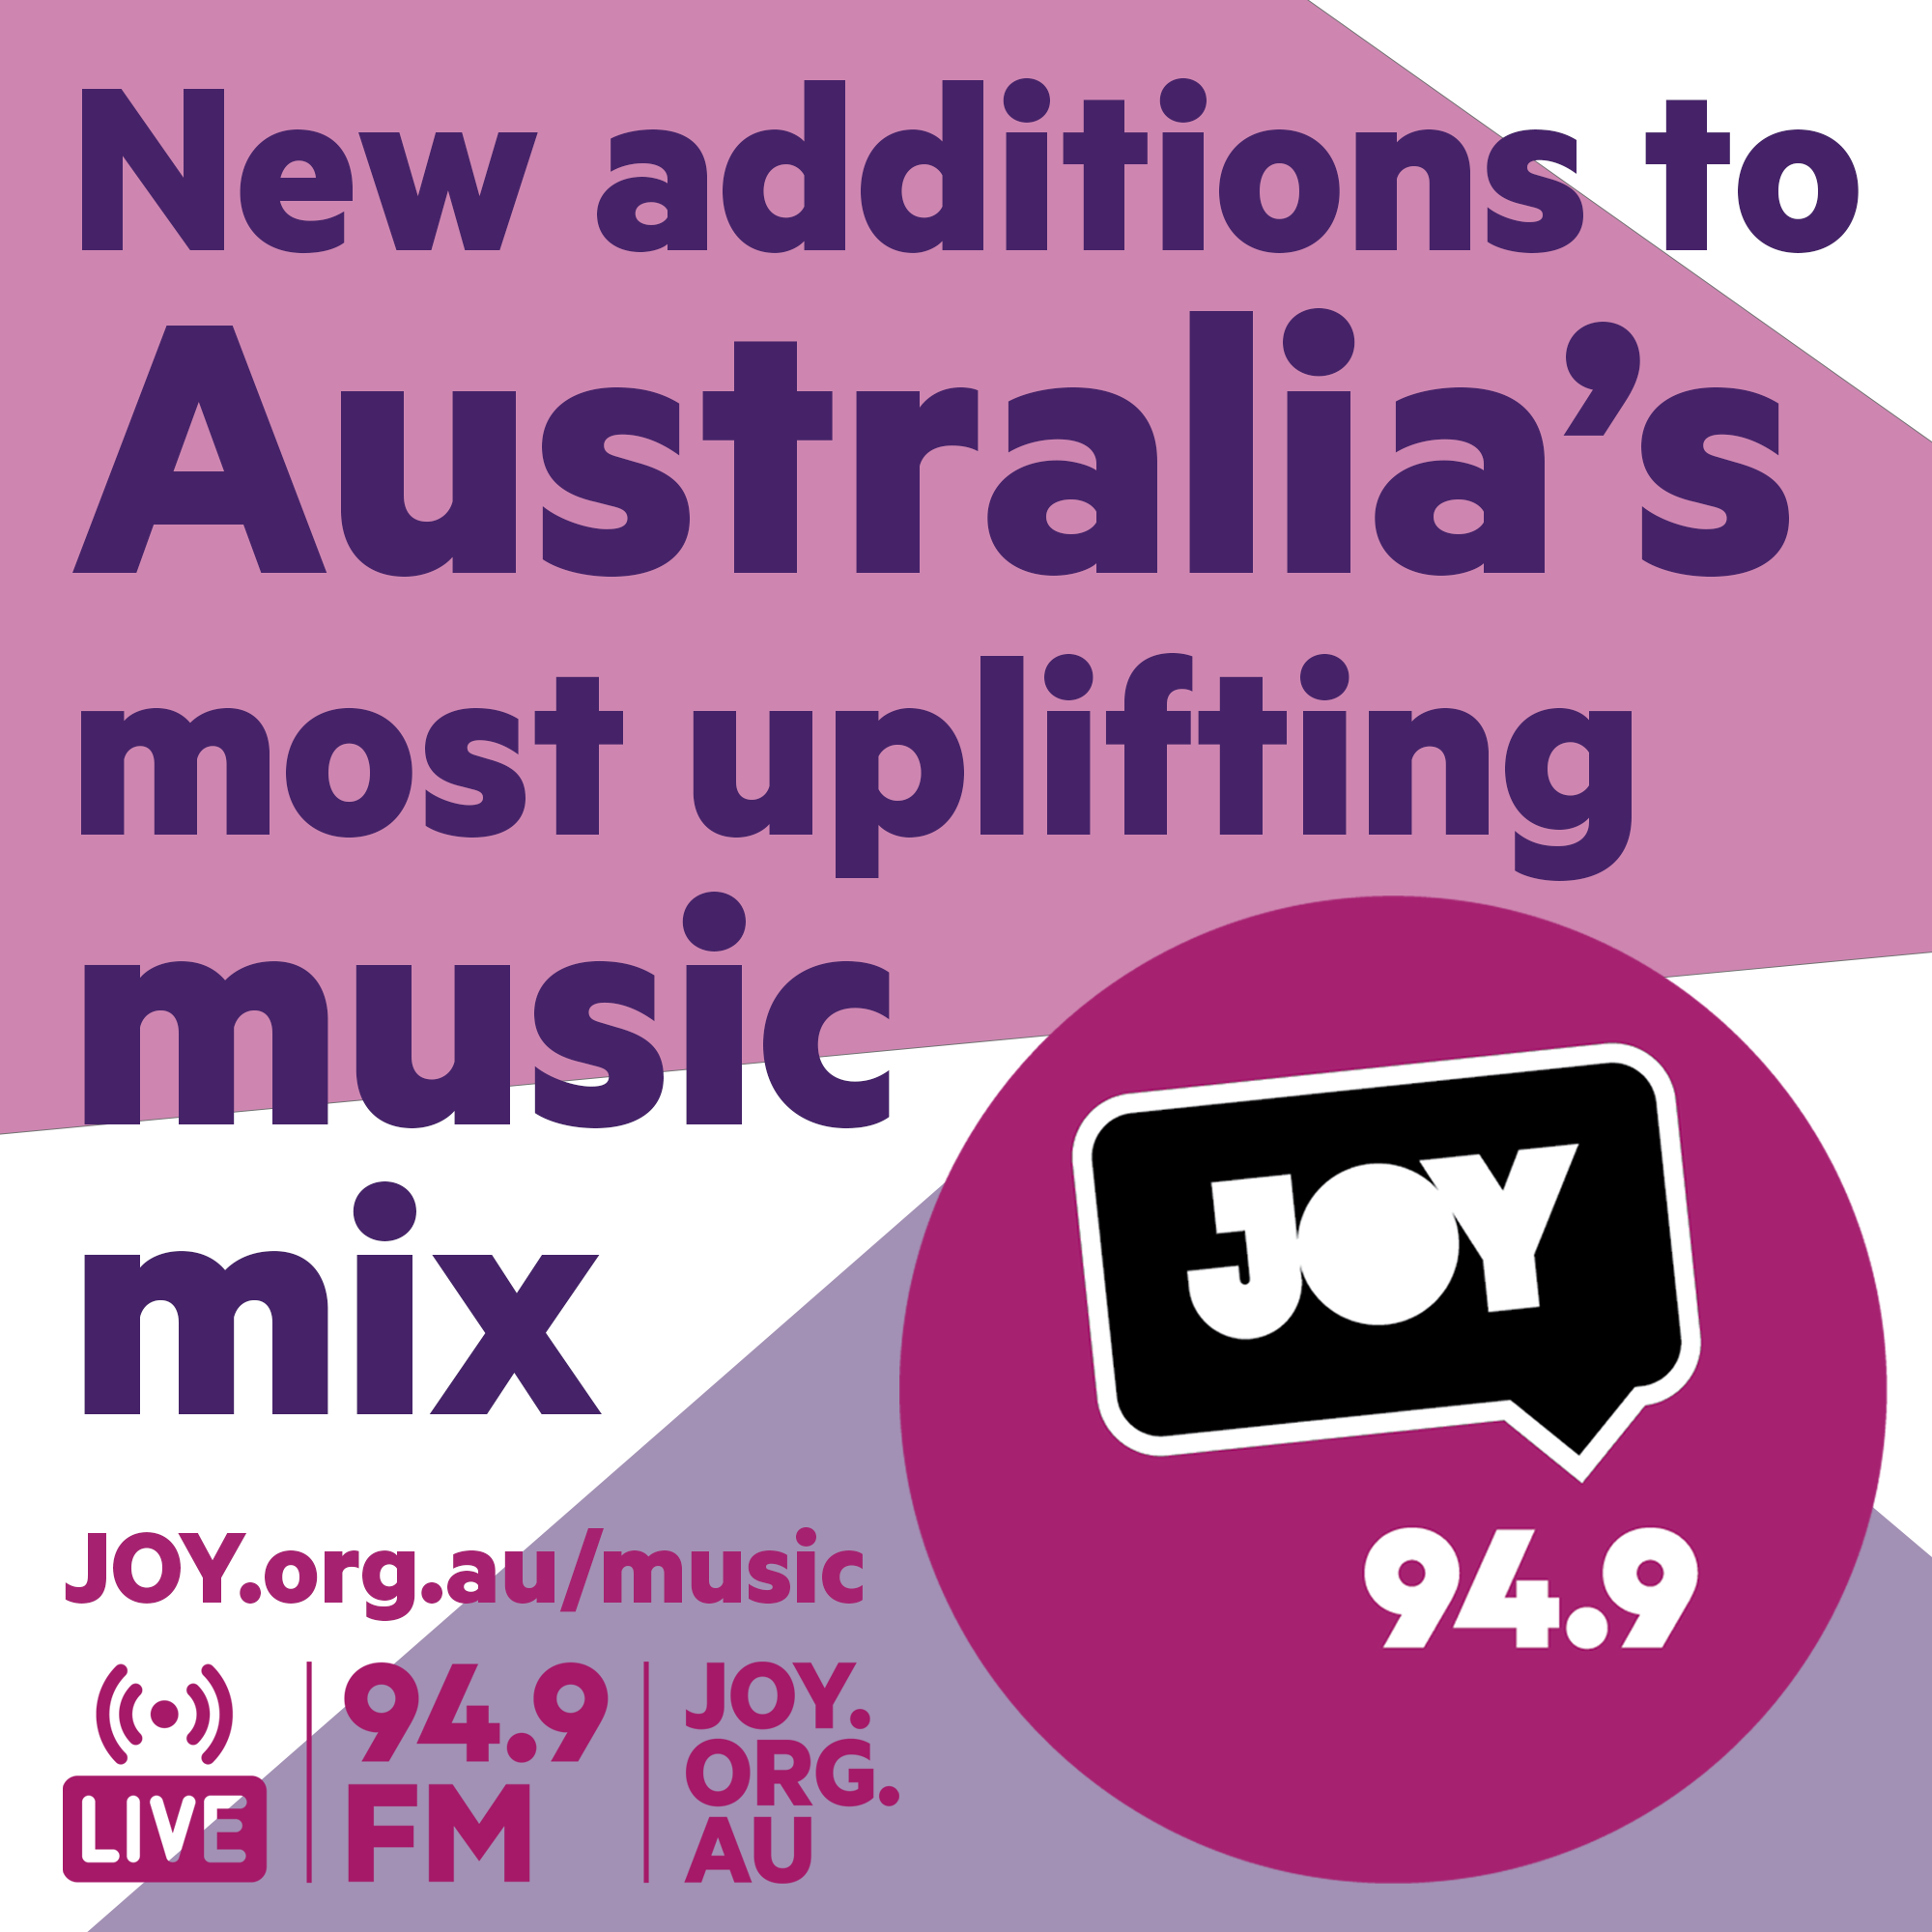 The newest songs to Australia’s most uplifting music mix: 22 June 2022